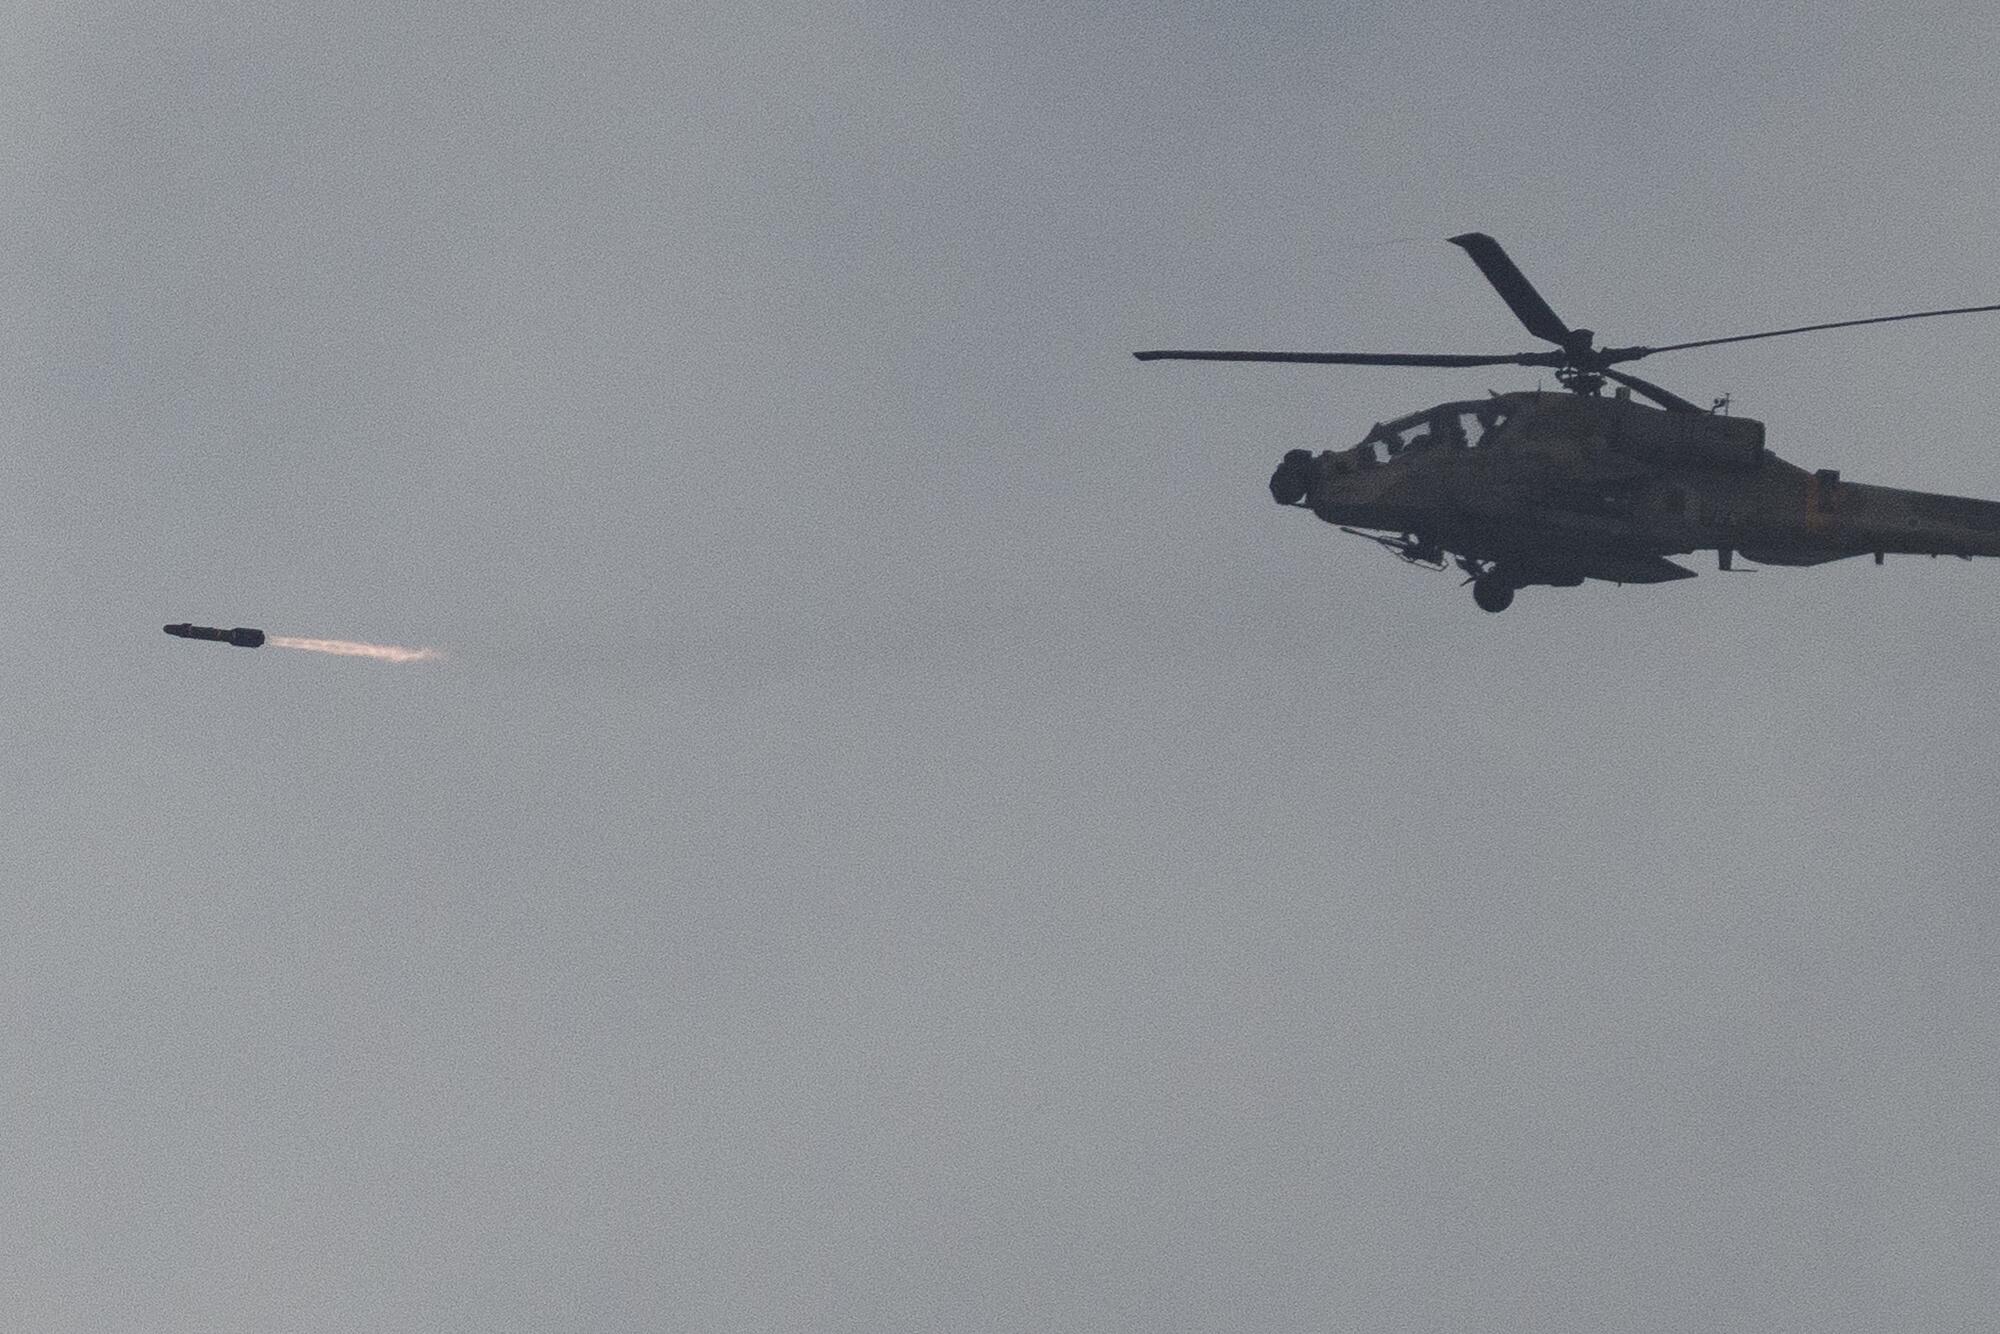 Israeli military helicopter firing a missile